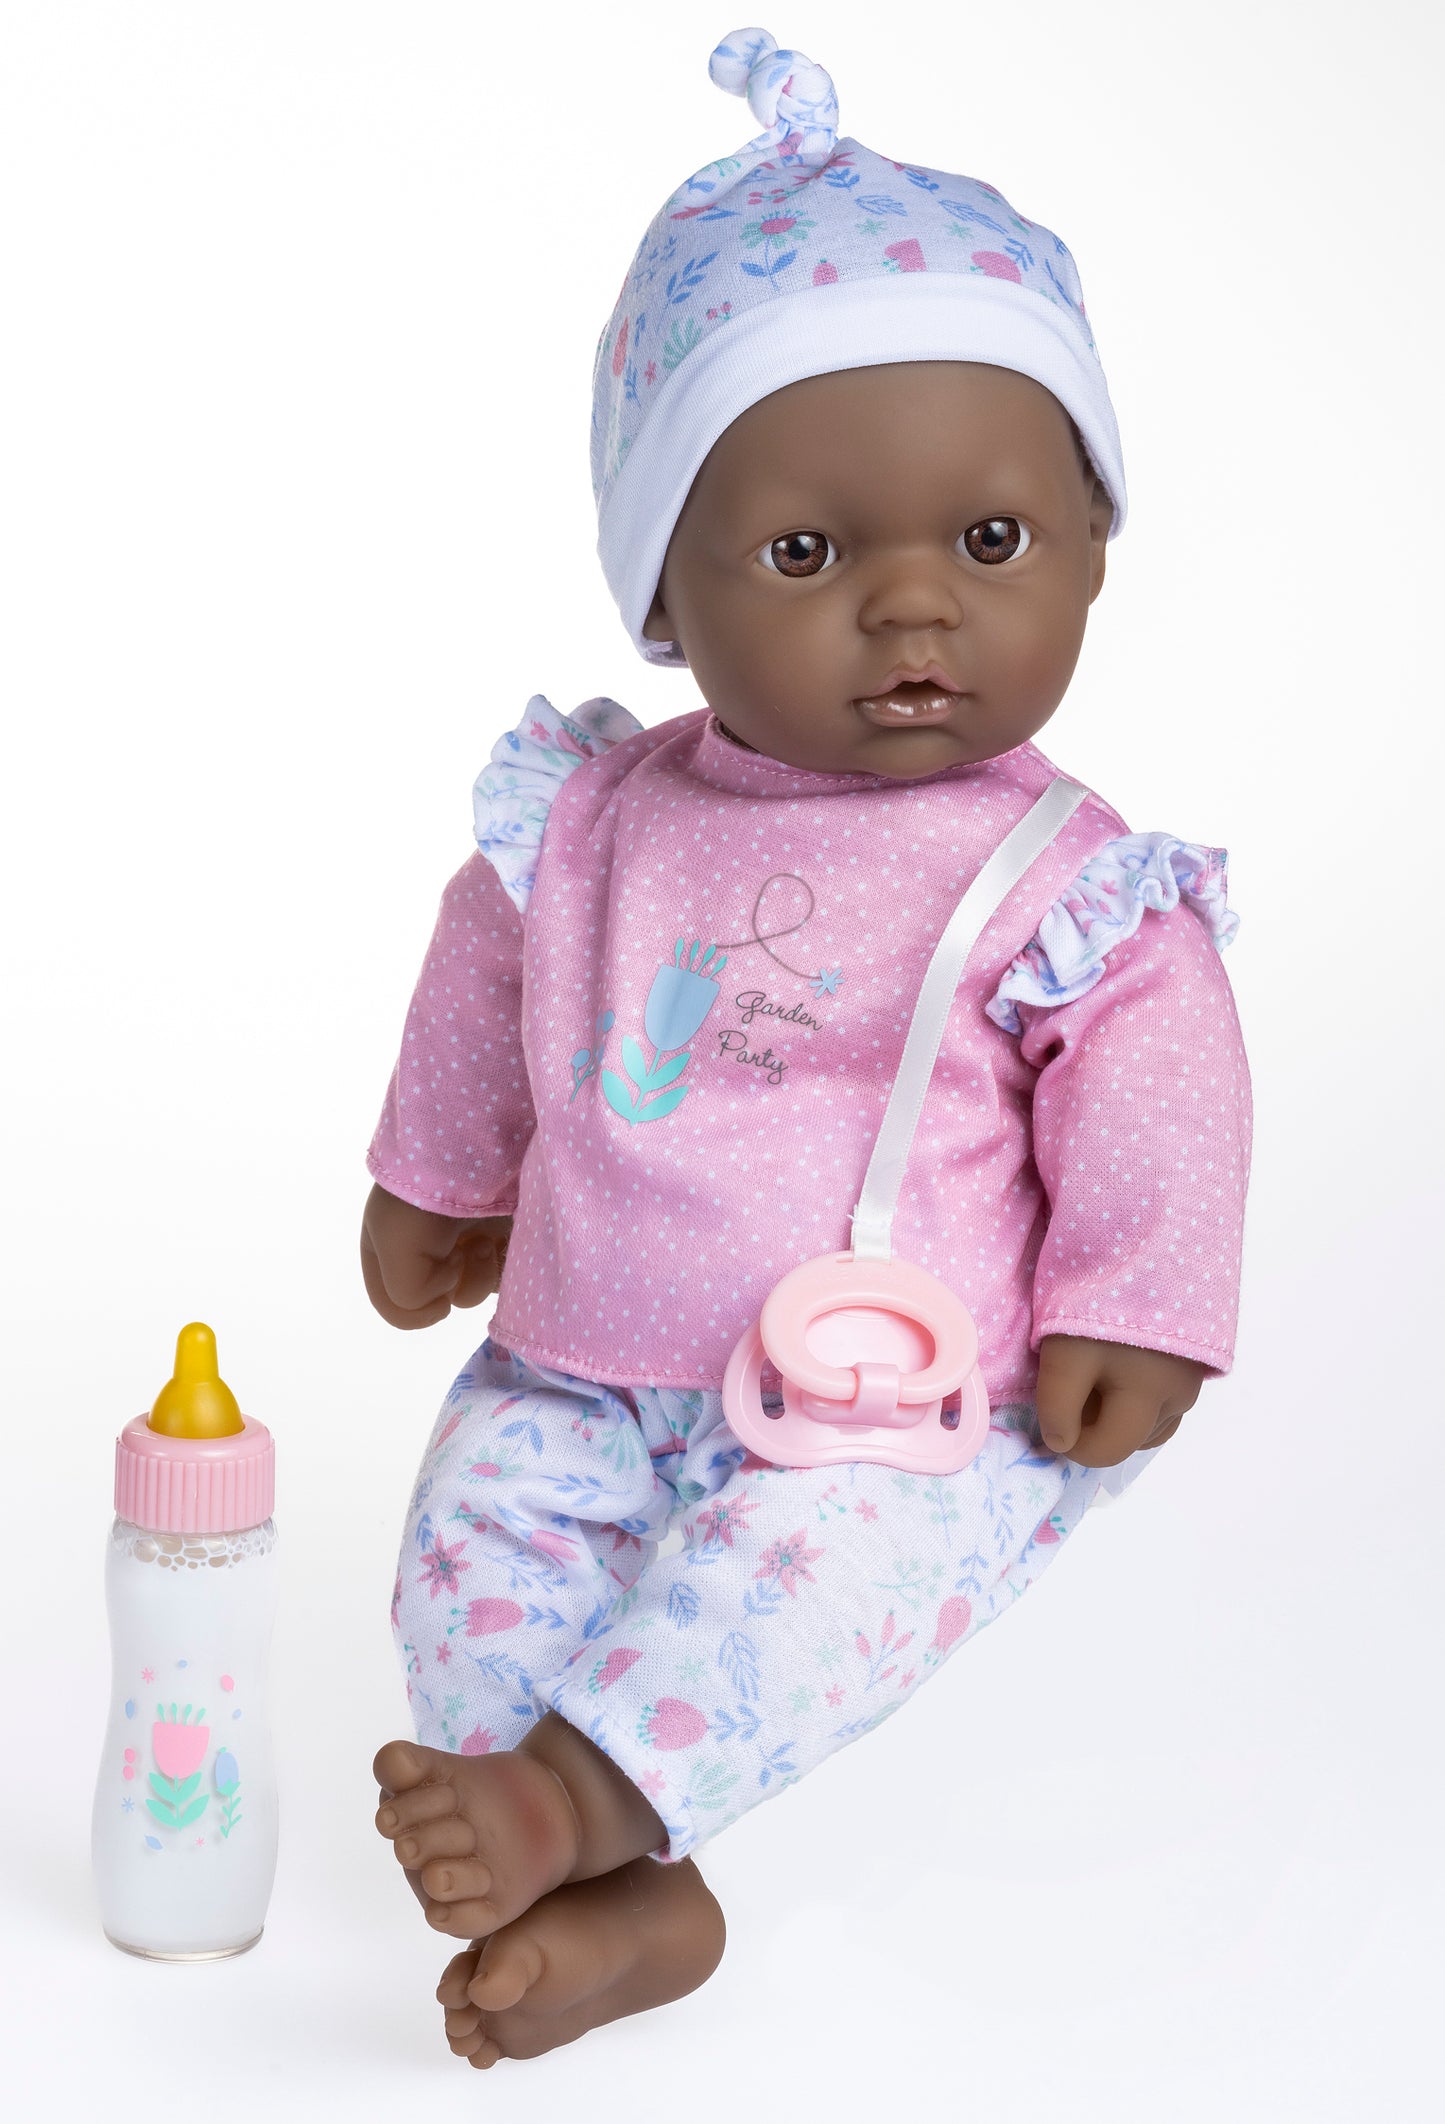 La Baby ® 16" Soft Body Baby Doll Pink/White 3 Piece Outfit w/ Pacifier & Magic Bottle. African American.